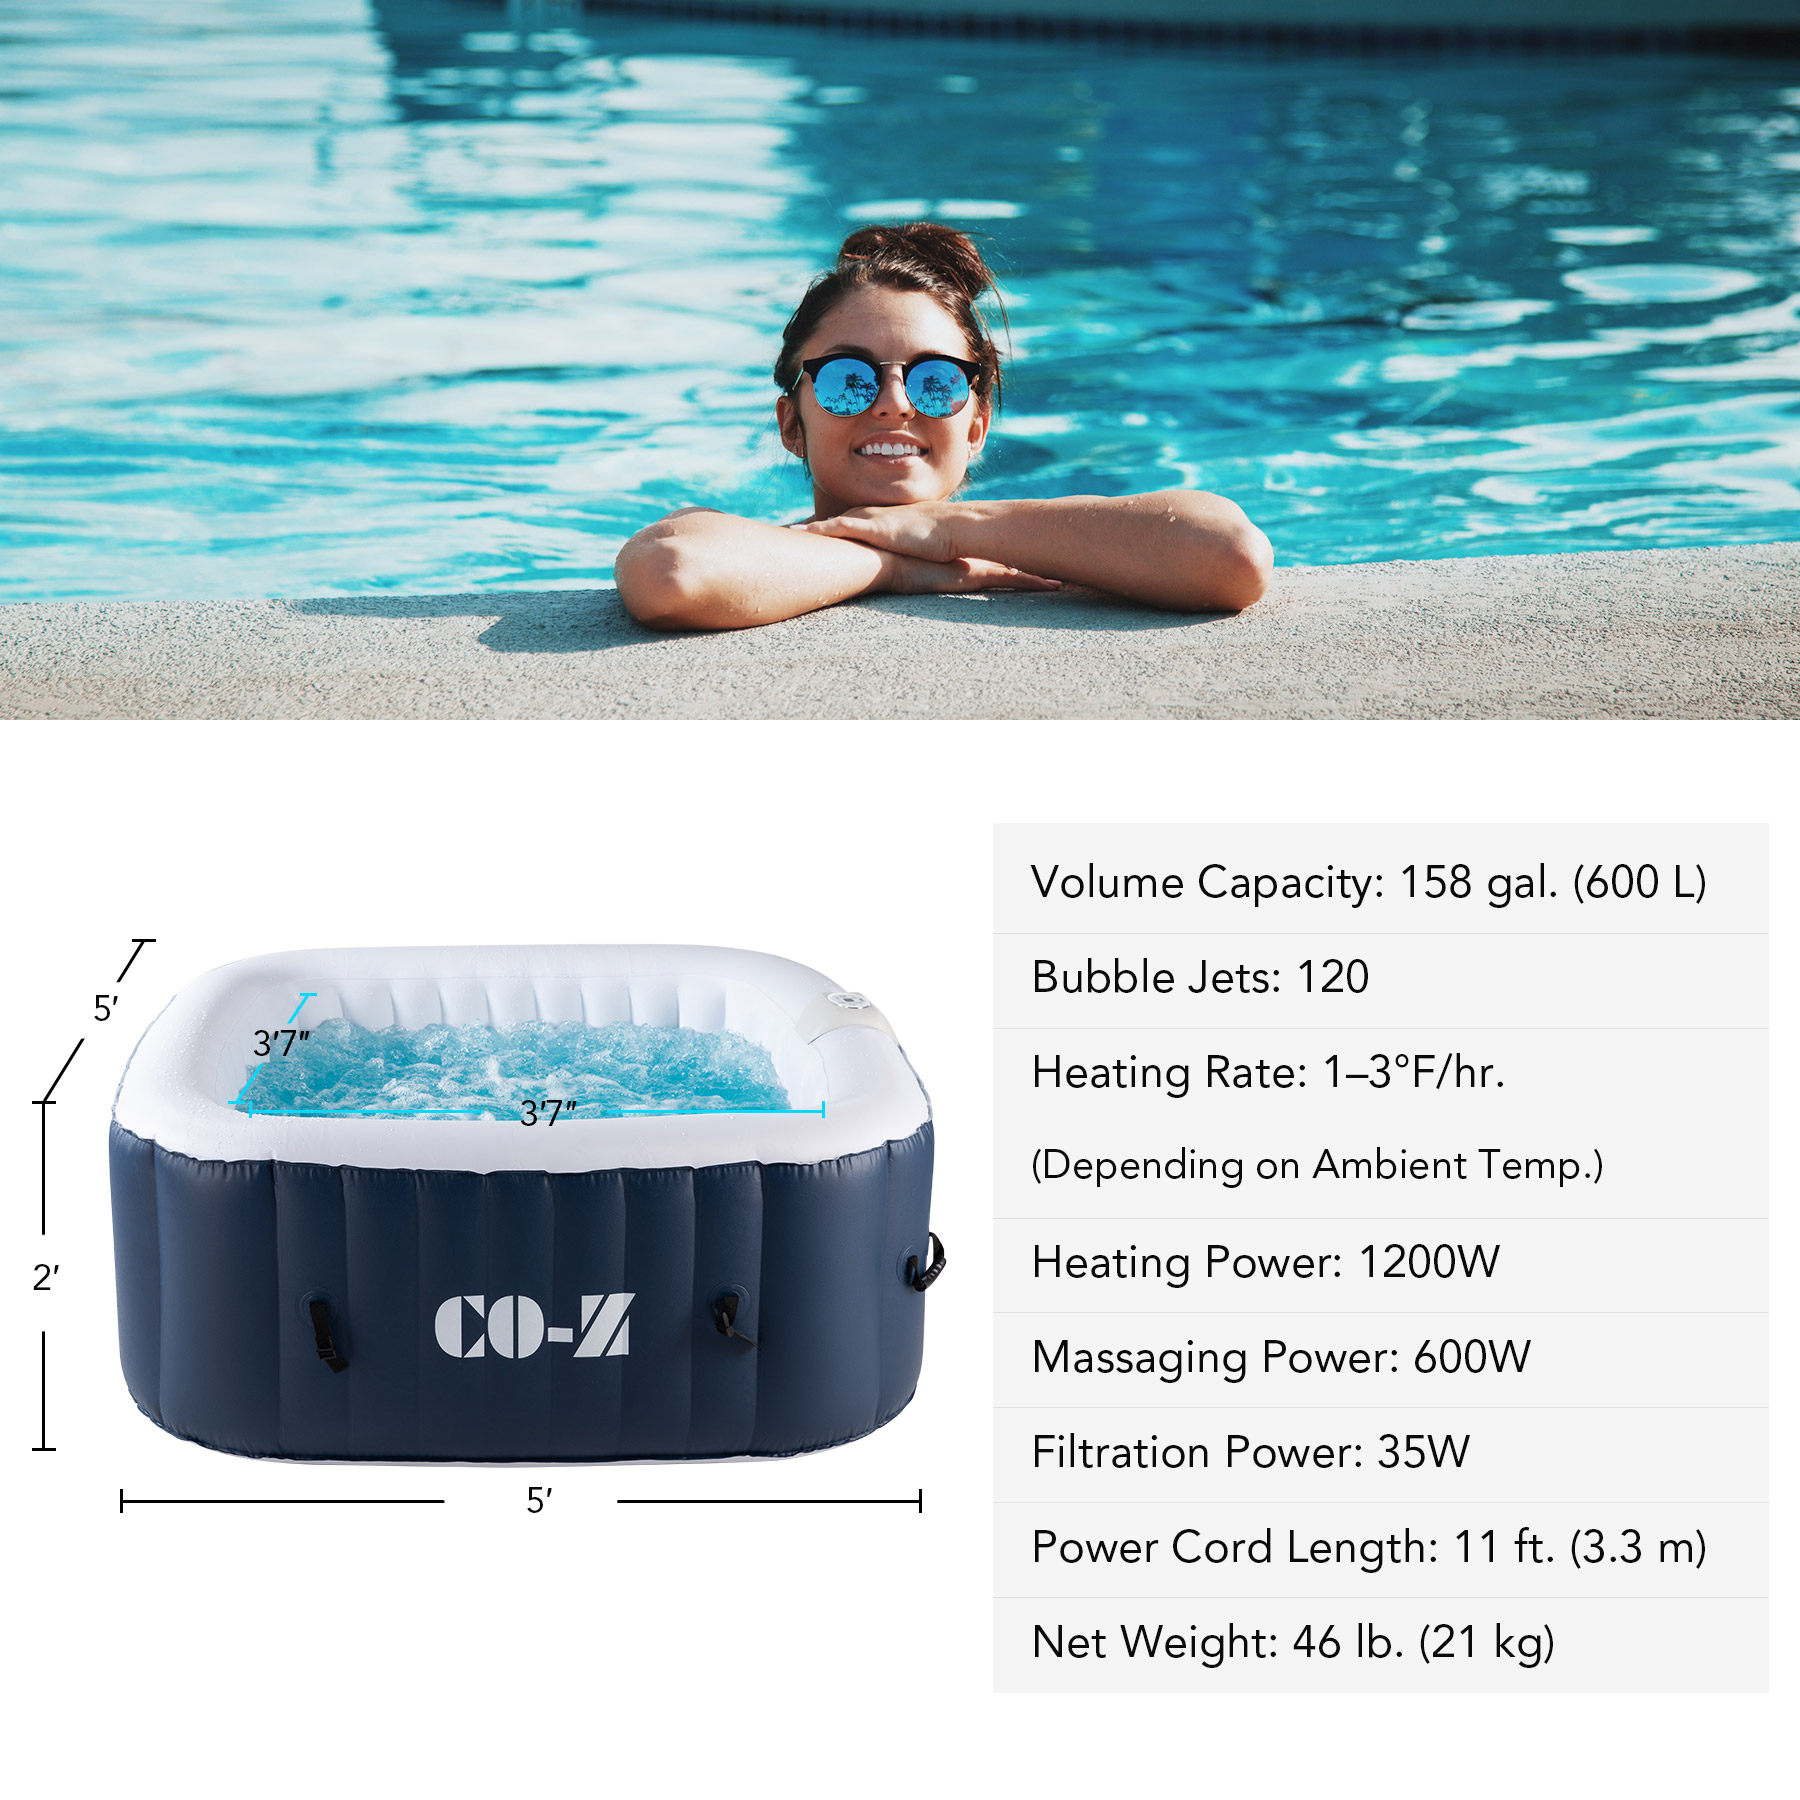 CO-Z 6x6ft PVC Round Inflatable Spa Tub w Heater & 120 Massaging Jets ...